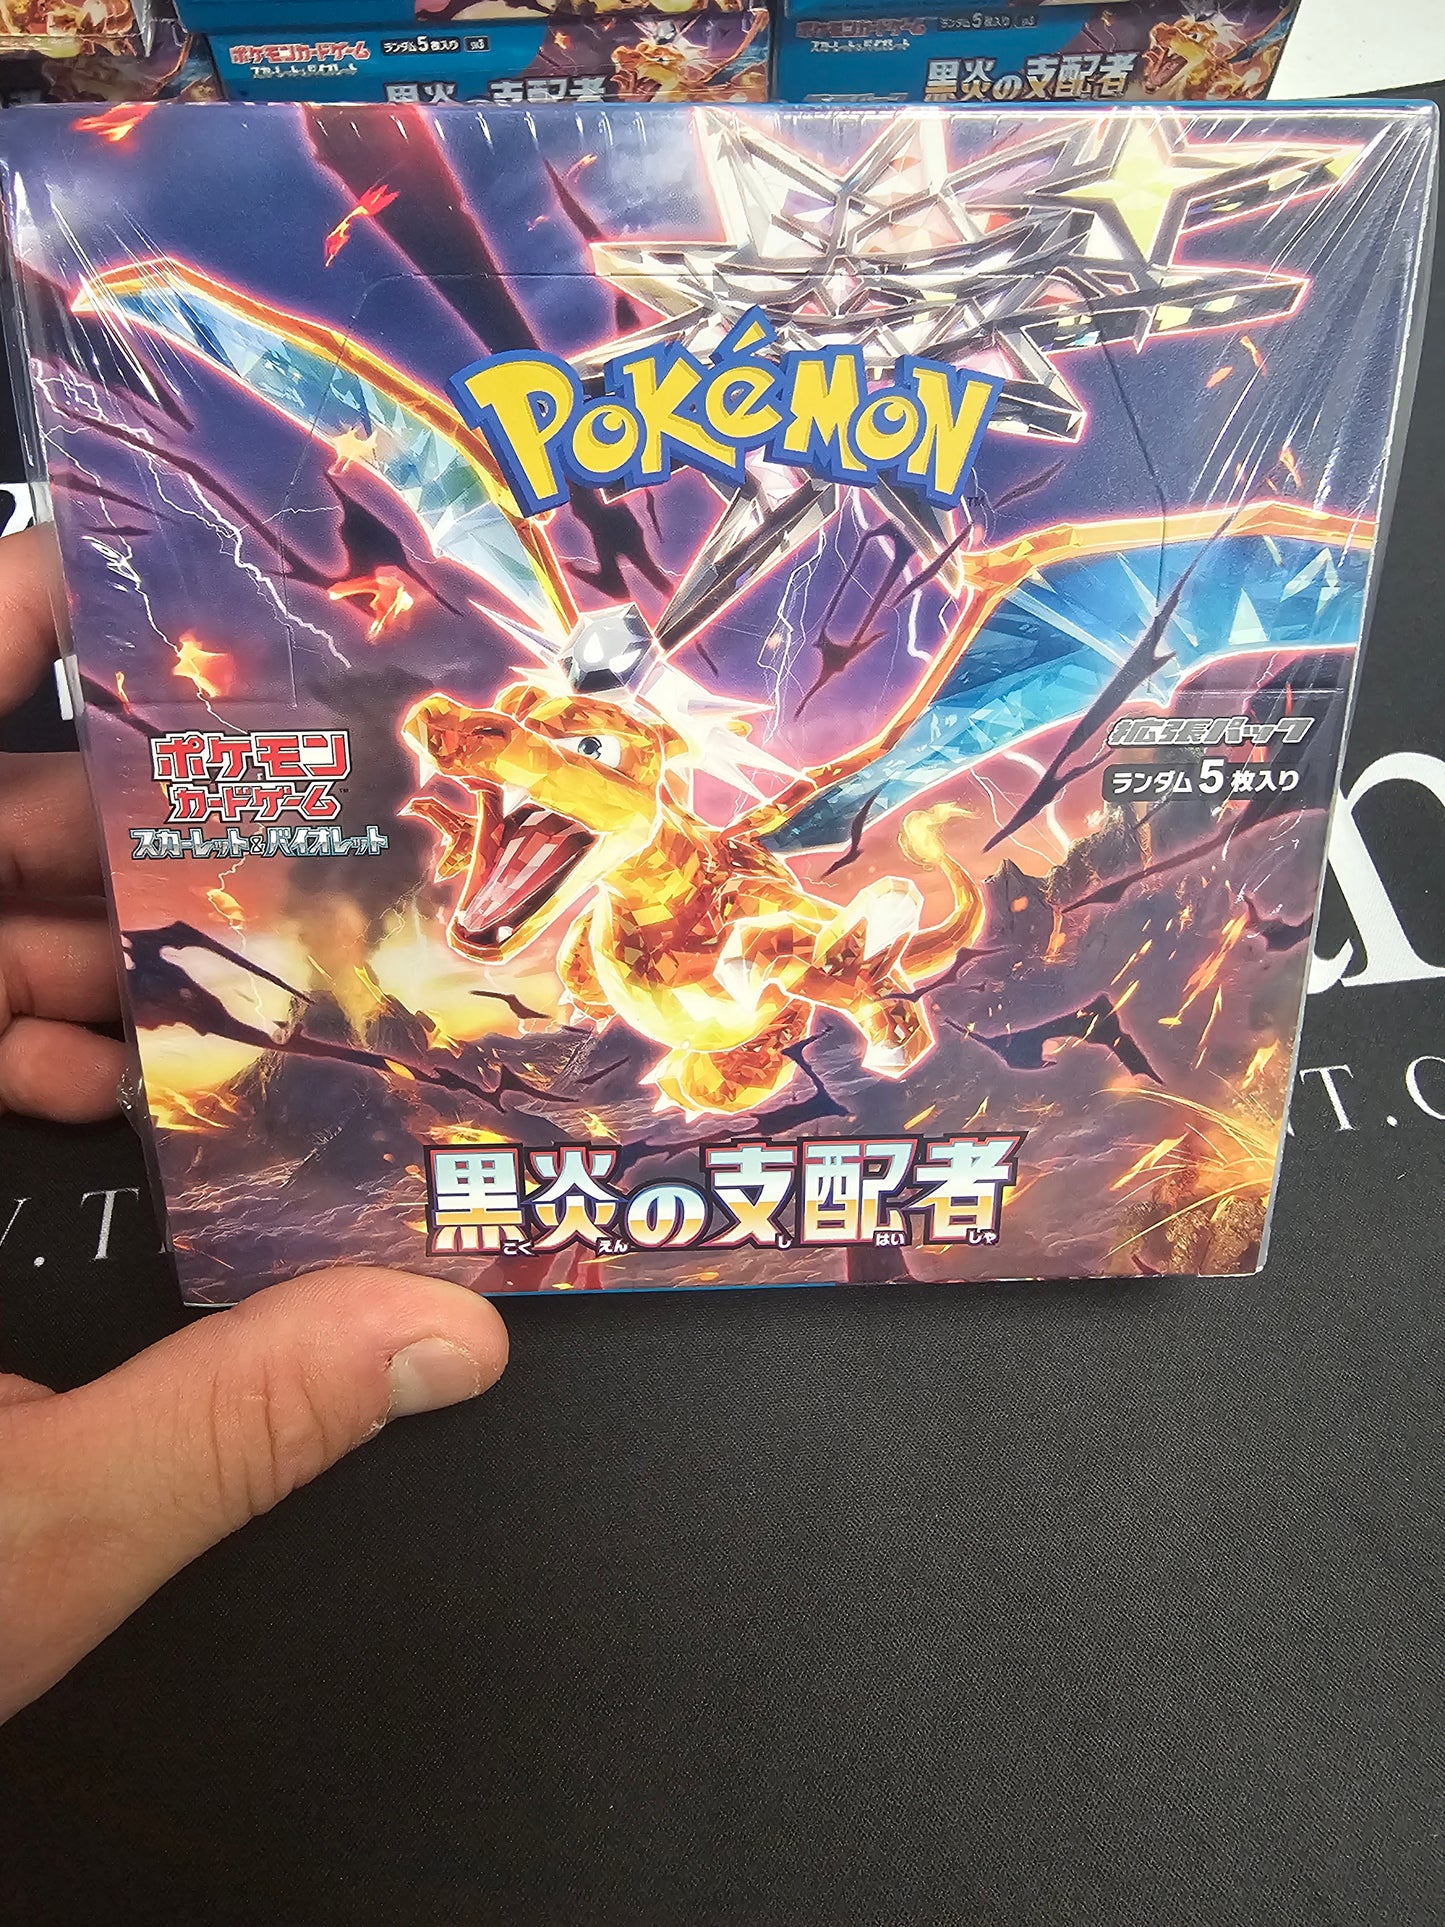 Pokémon: Ruler of the Black Flame Booster Box